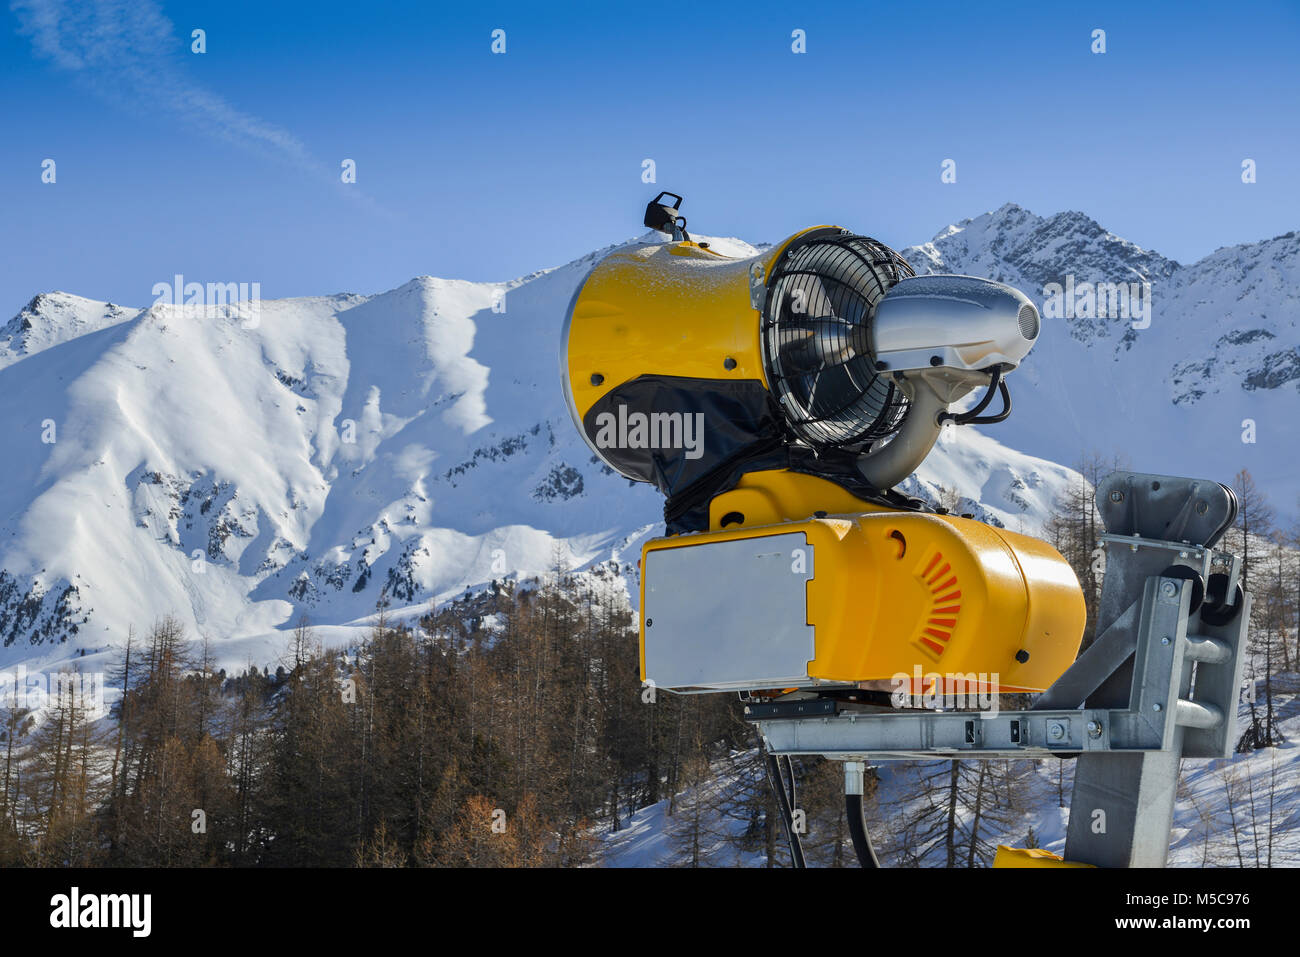 Yellow Snow Maker Image & Photo (Free Trial)